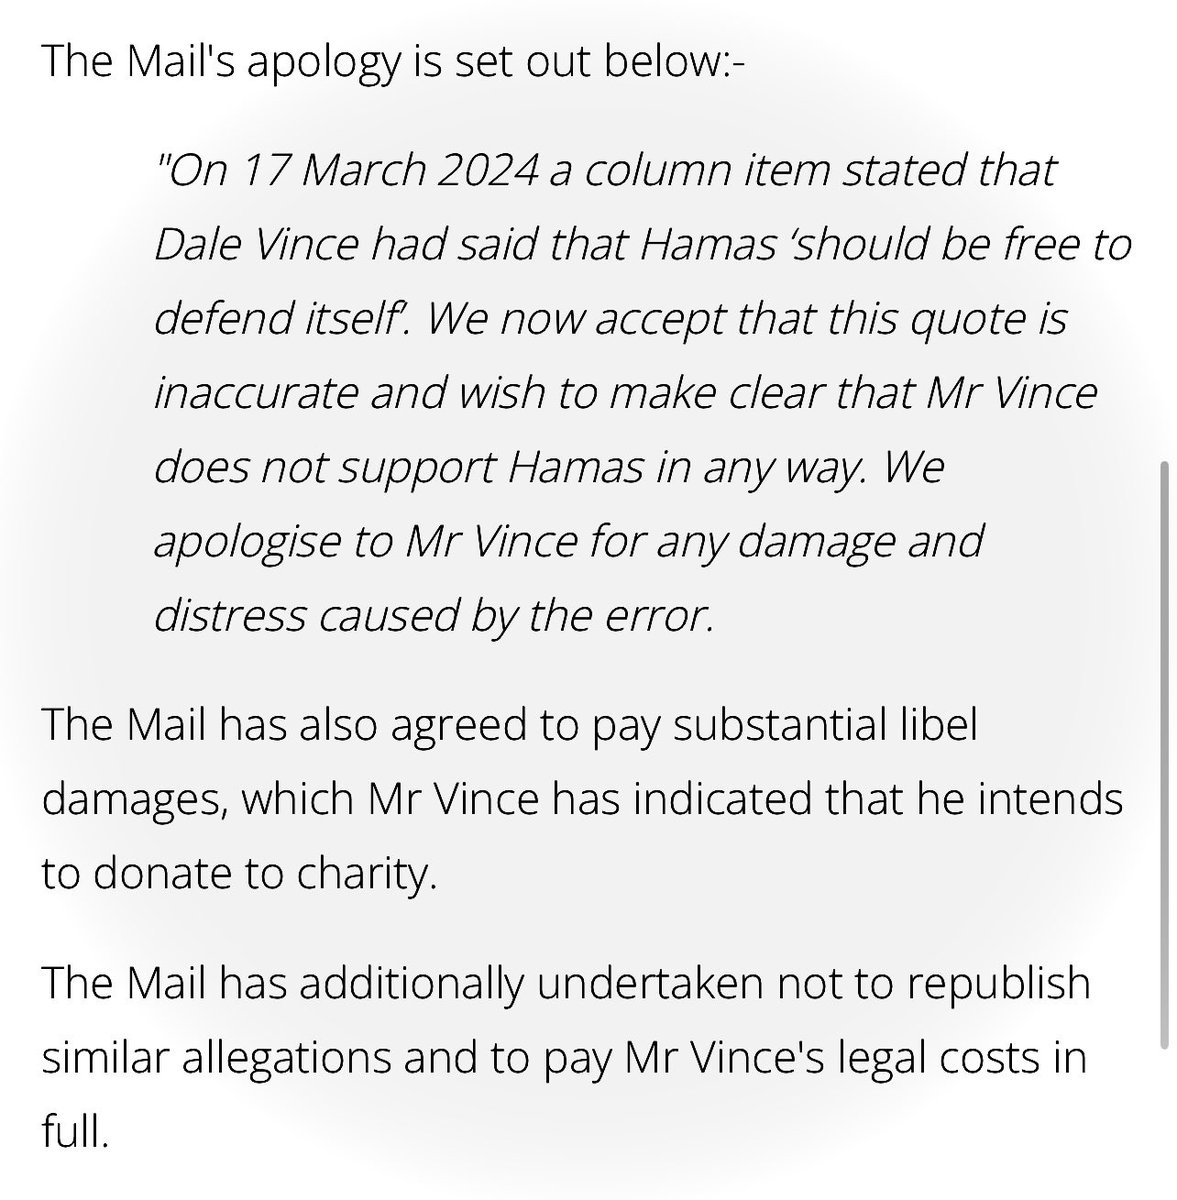 BREAKING Daily Mail apologises to Dale Vince @DaleVince and pays him substantial damages after Andrew Pierce @toryboypierce libelled him. Dale will donate it to charity. @DailyMailUK and their Tory led smear campaigns! Even Wikipedia won't accept Mail as valid reference